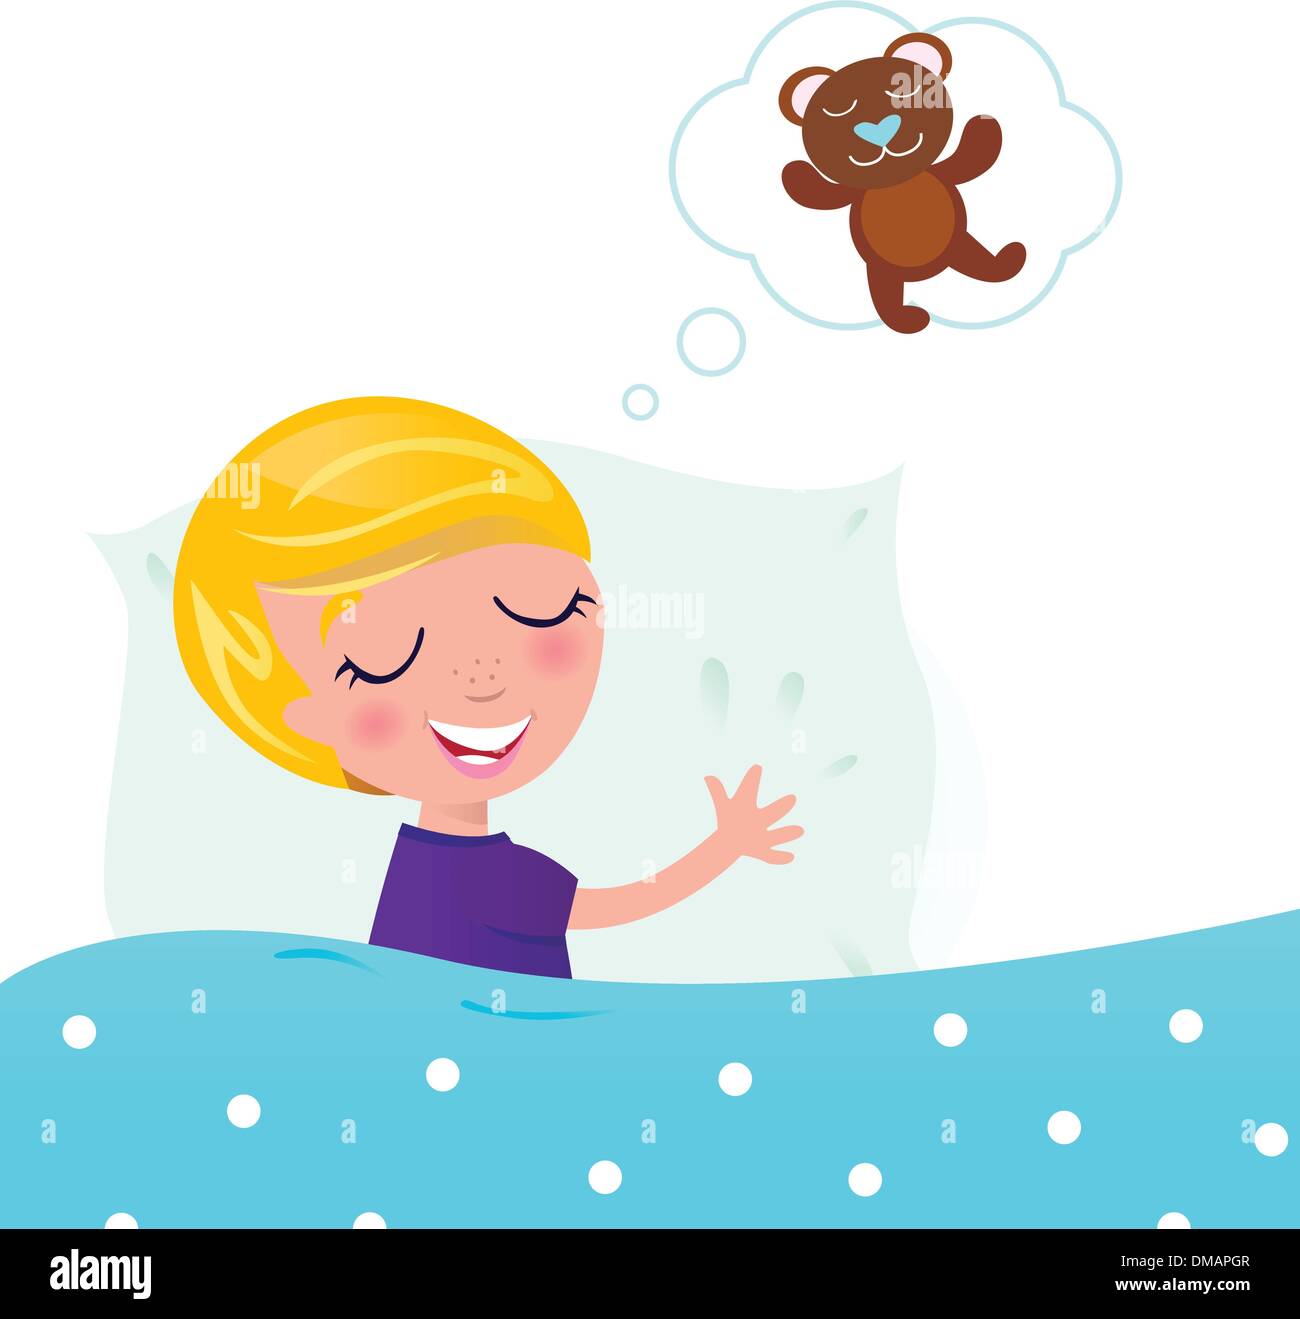 Cute Blond Child Sleeping And Dreaming About Teddy Bear Stock Vector